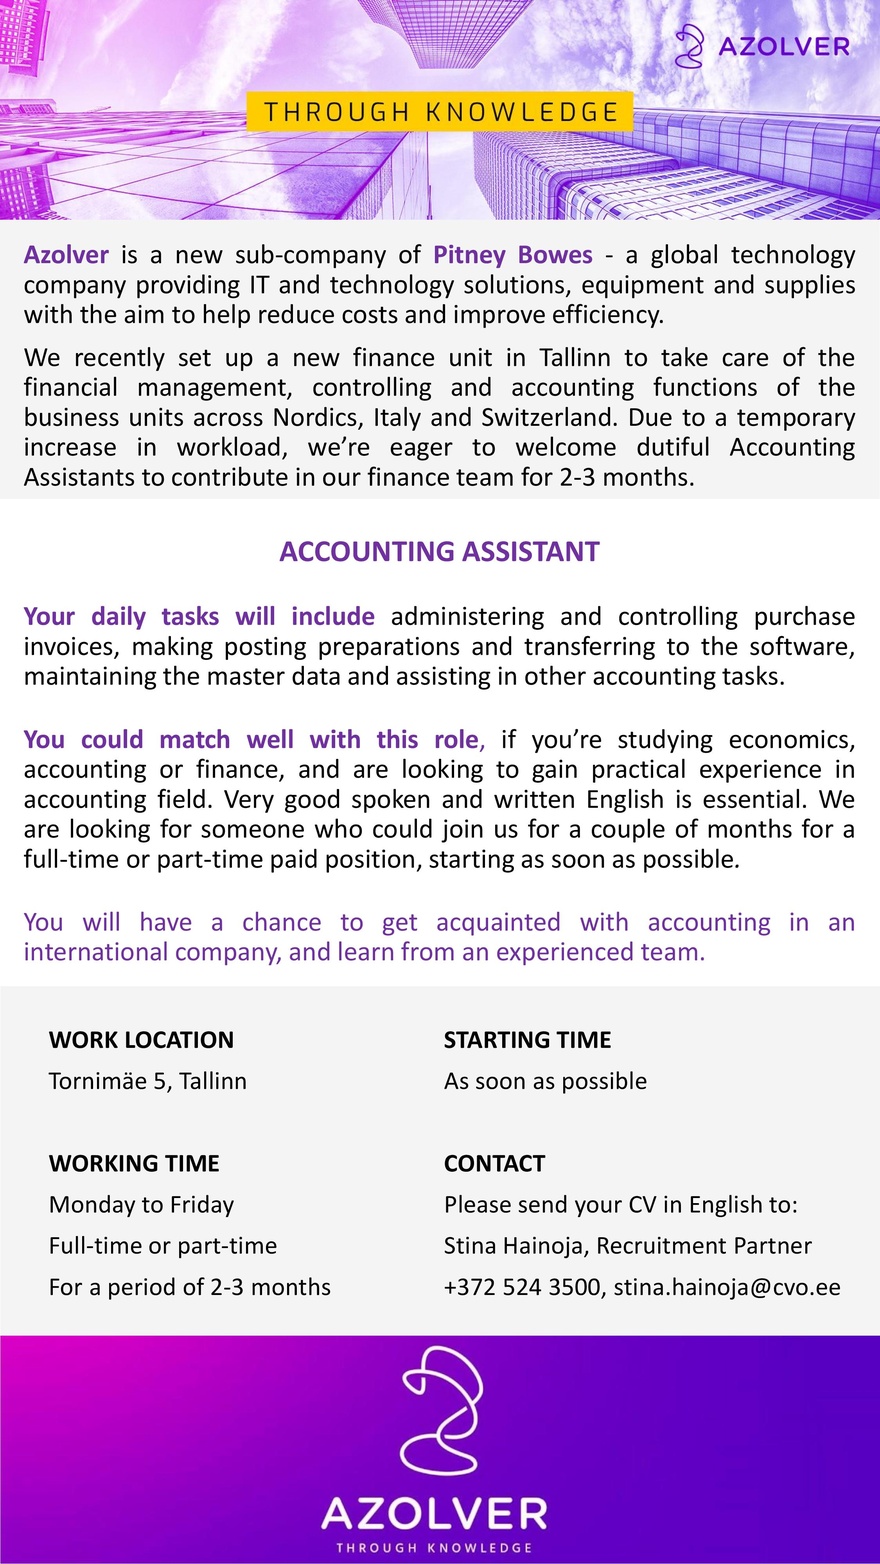 Azolver Eesti Accounting Assistant (flexible time, temporary role for 2-3 months)